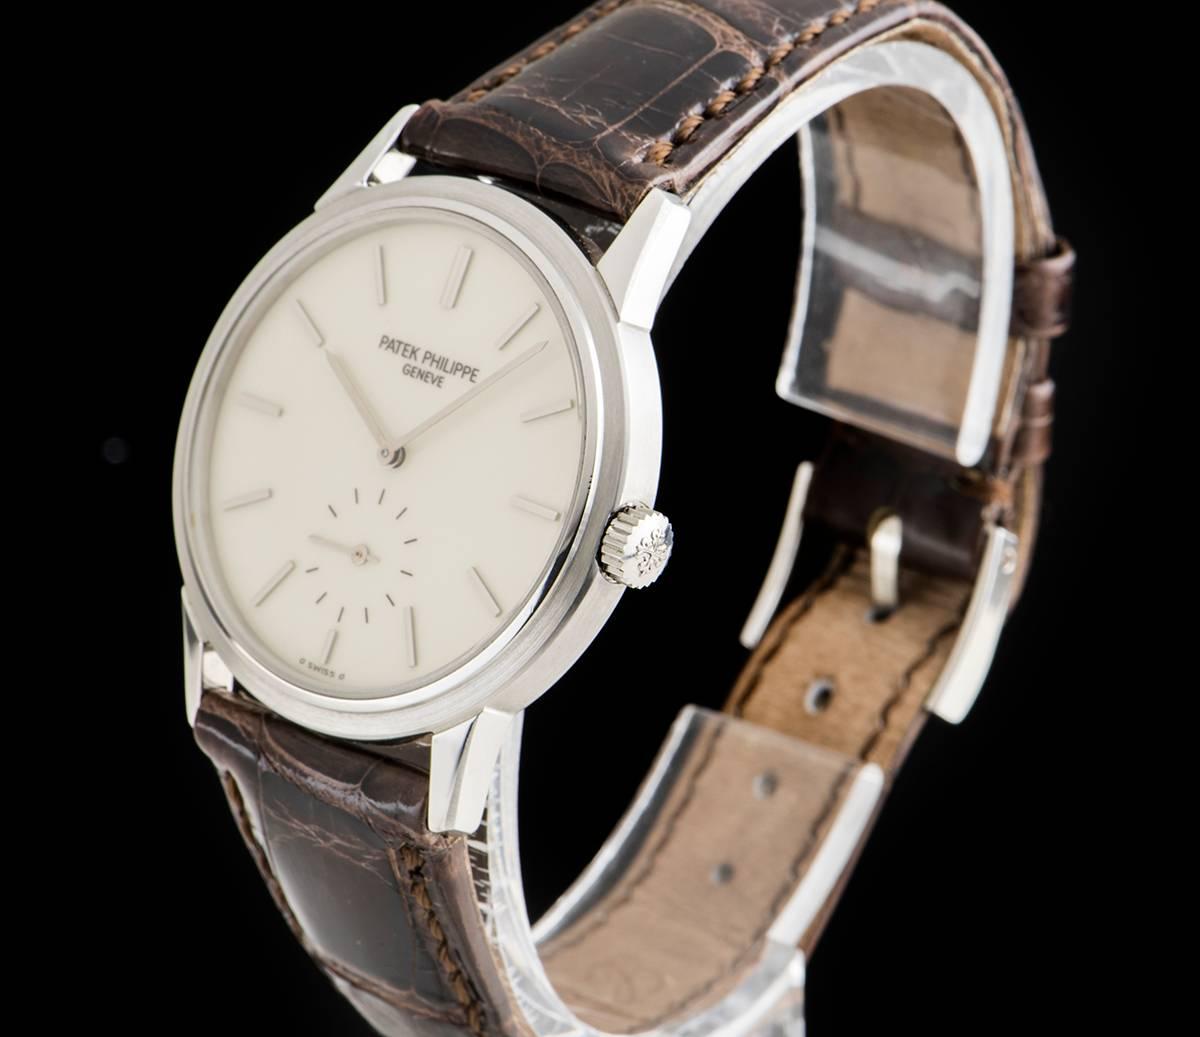 A Stainless Steel 150th Anniversary Calatrava Gents Wristwatch, very rare enamel dial with applied hour markers, small seconds at 6 0'clock, a fixed stainless steel bezel, an original brown leather strap with a stainless steel pin buckle (not by